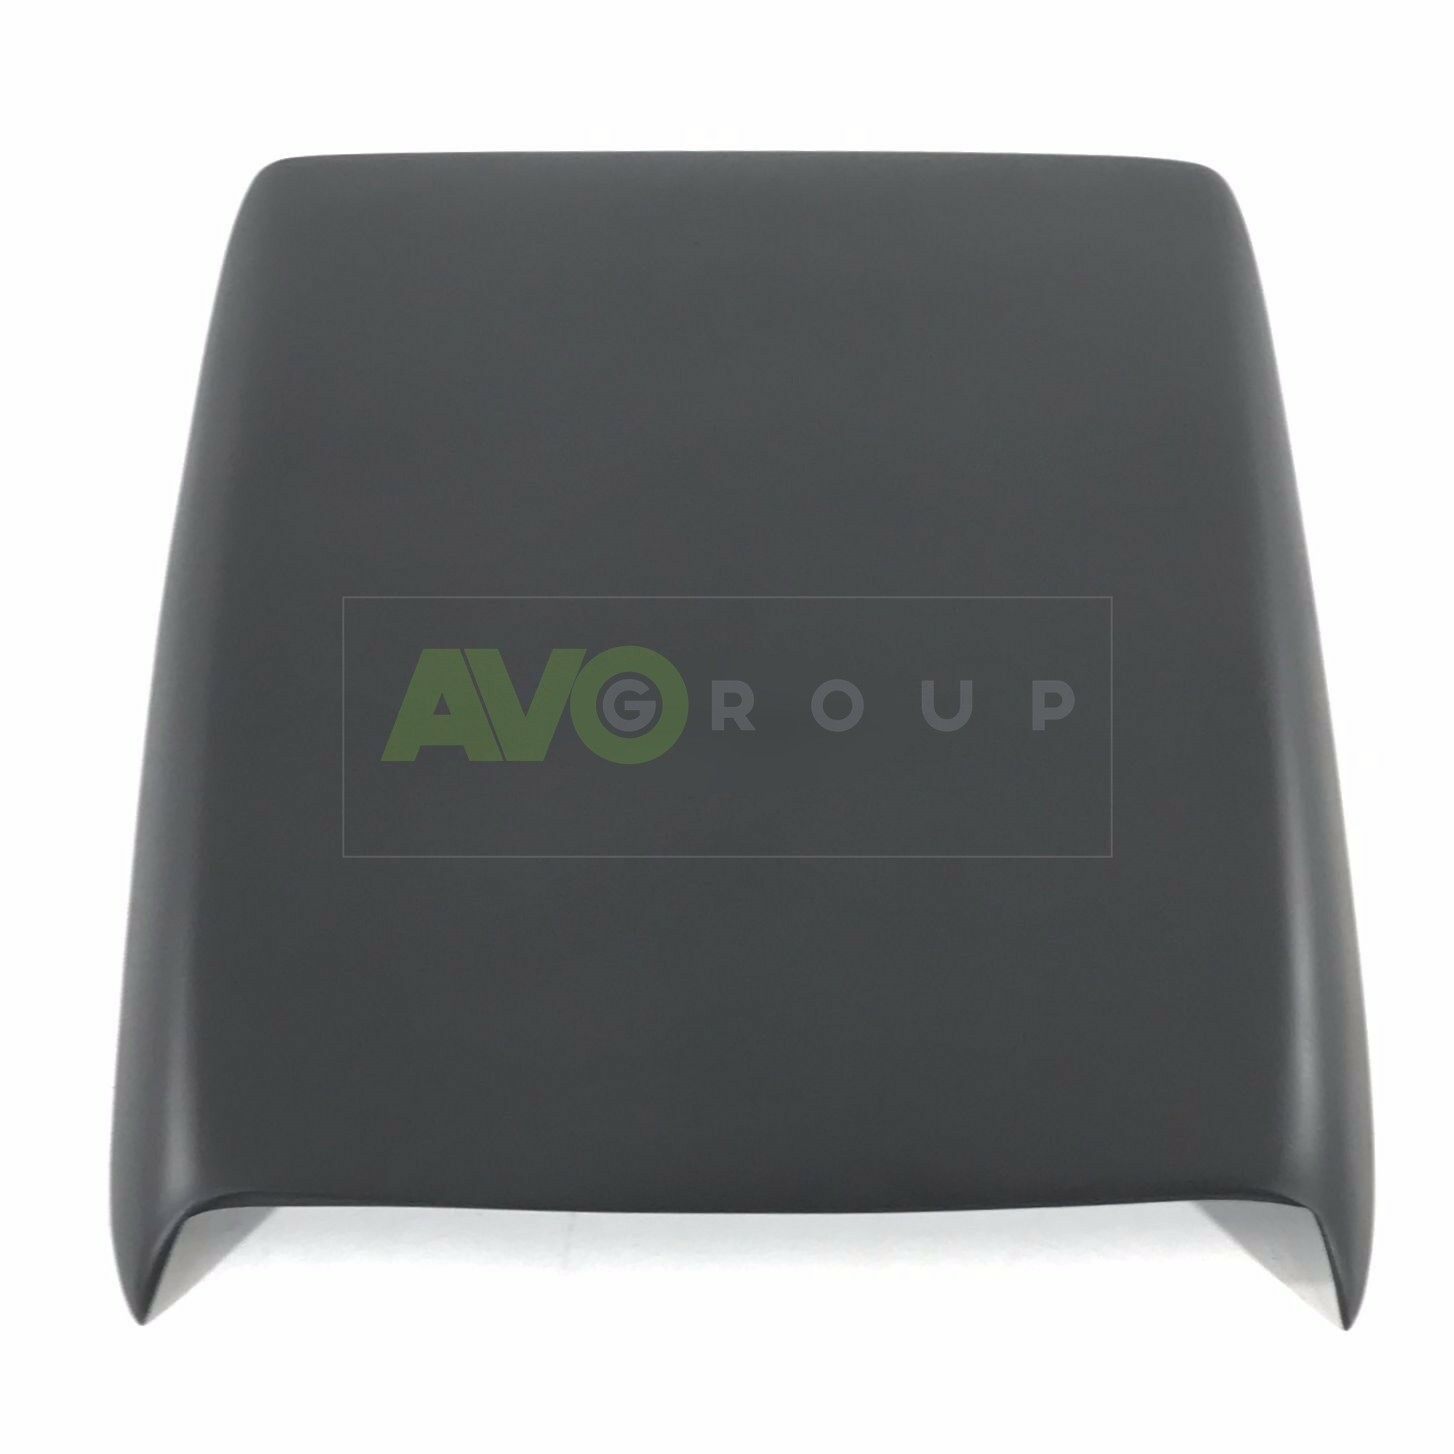 Universal Air Intake Scoop Airscoop Cover Ventilation Filter Turbo Fan Vent v2